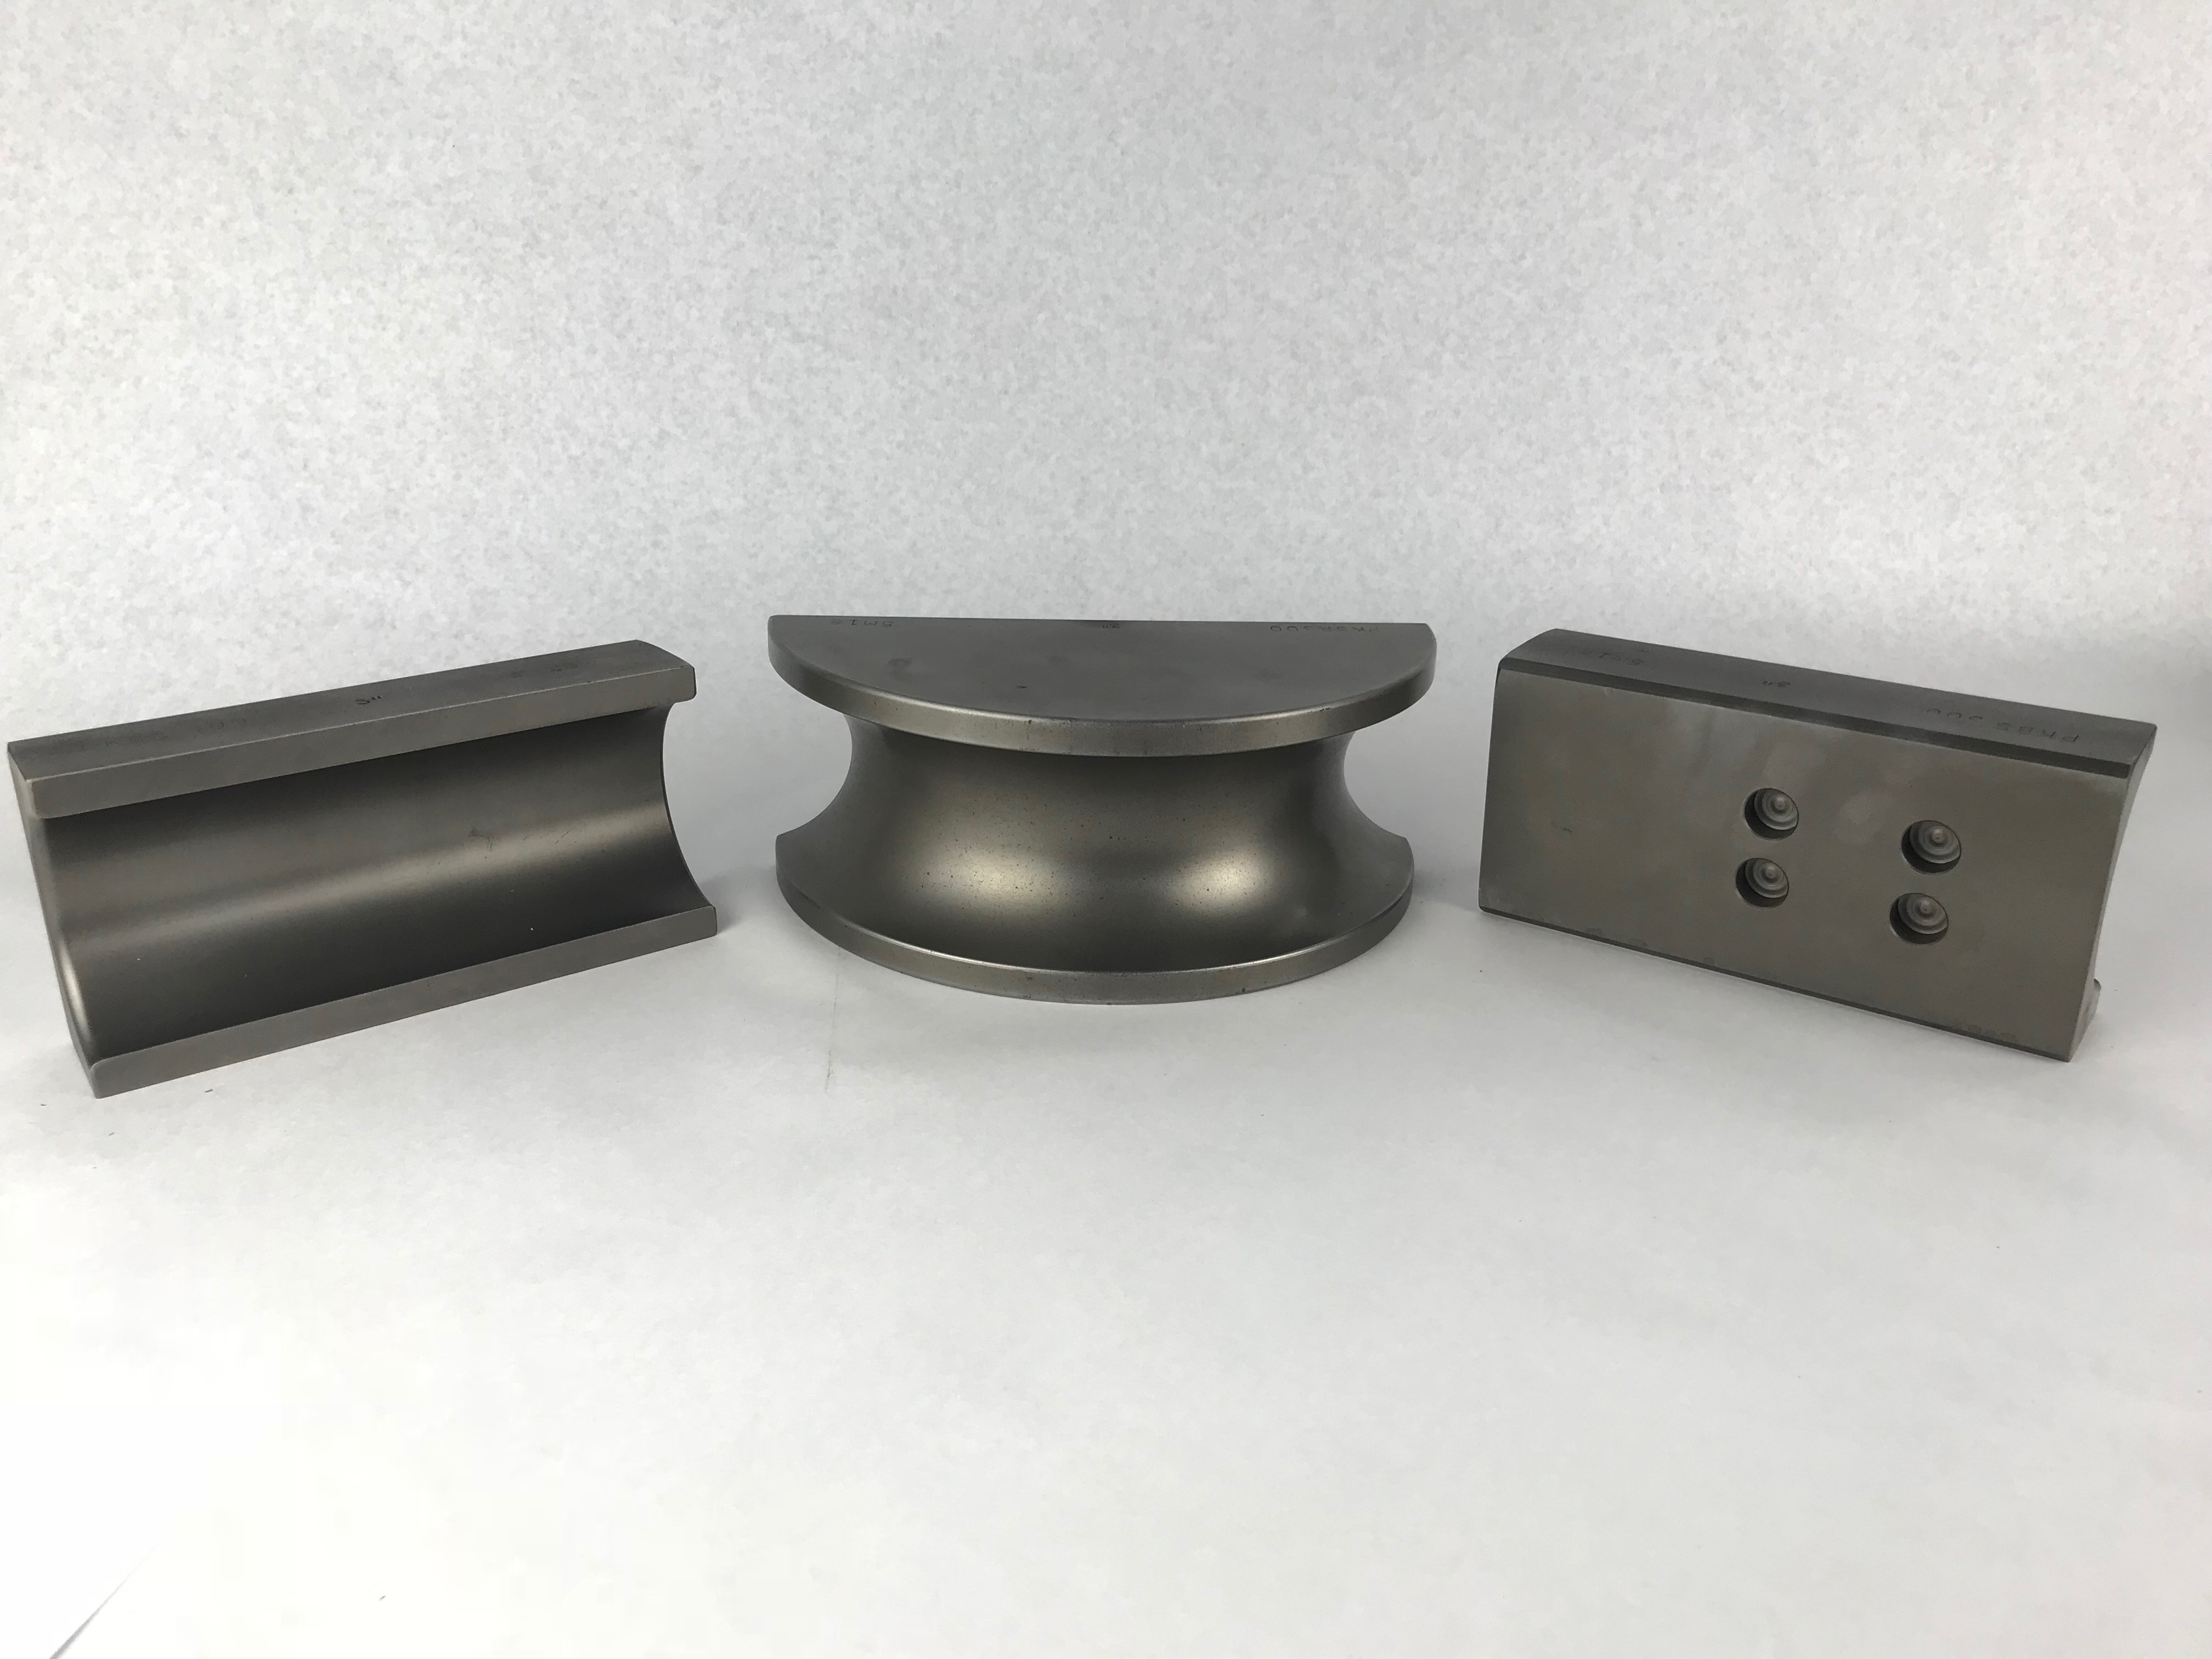 Steel Huth tooling pieces for BendPak®️ machines against a white background. Three parts are shown that are used as the back shoes and bending dies for 3